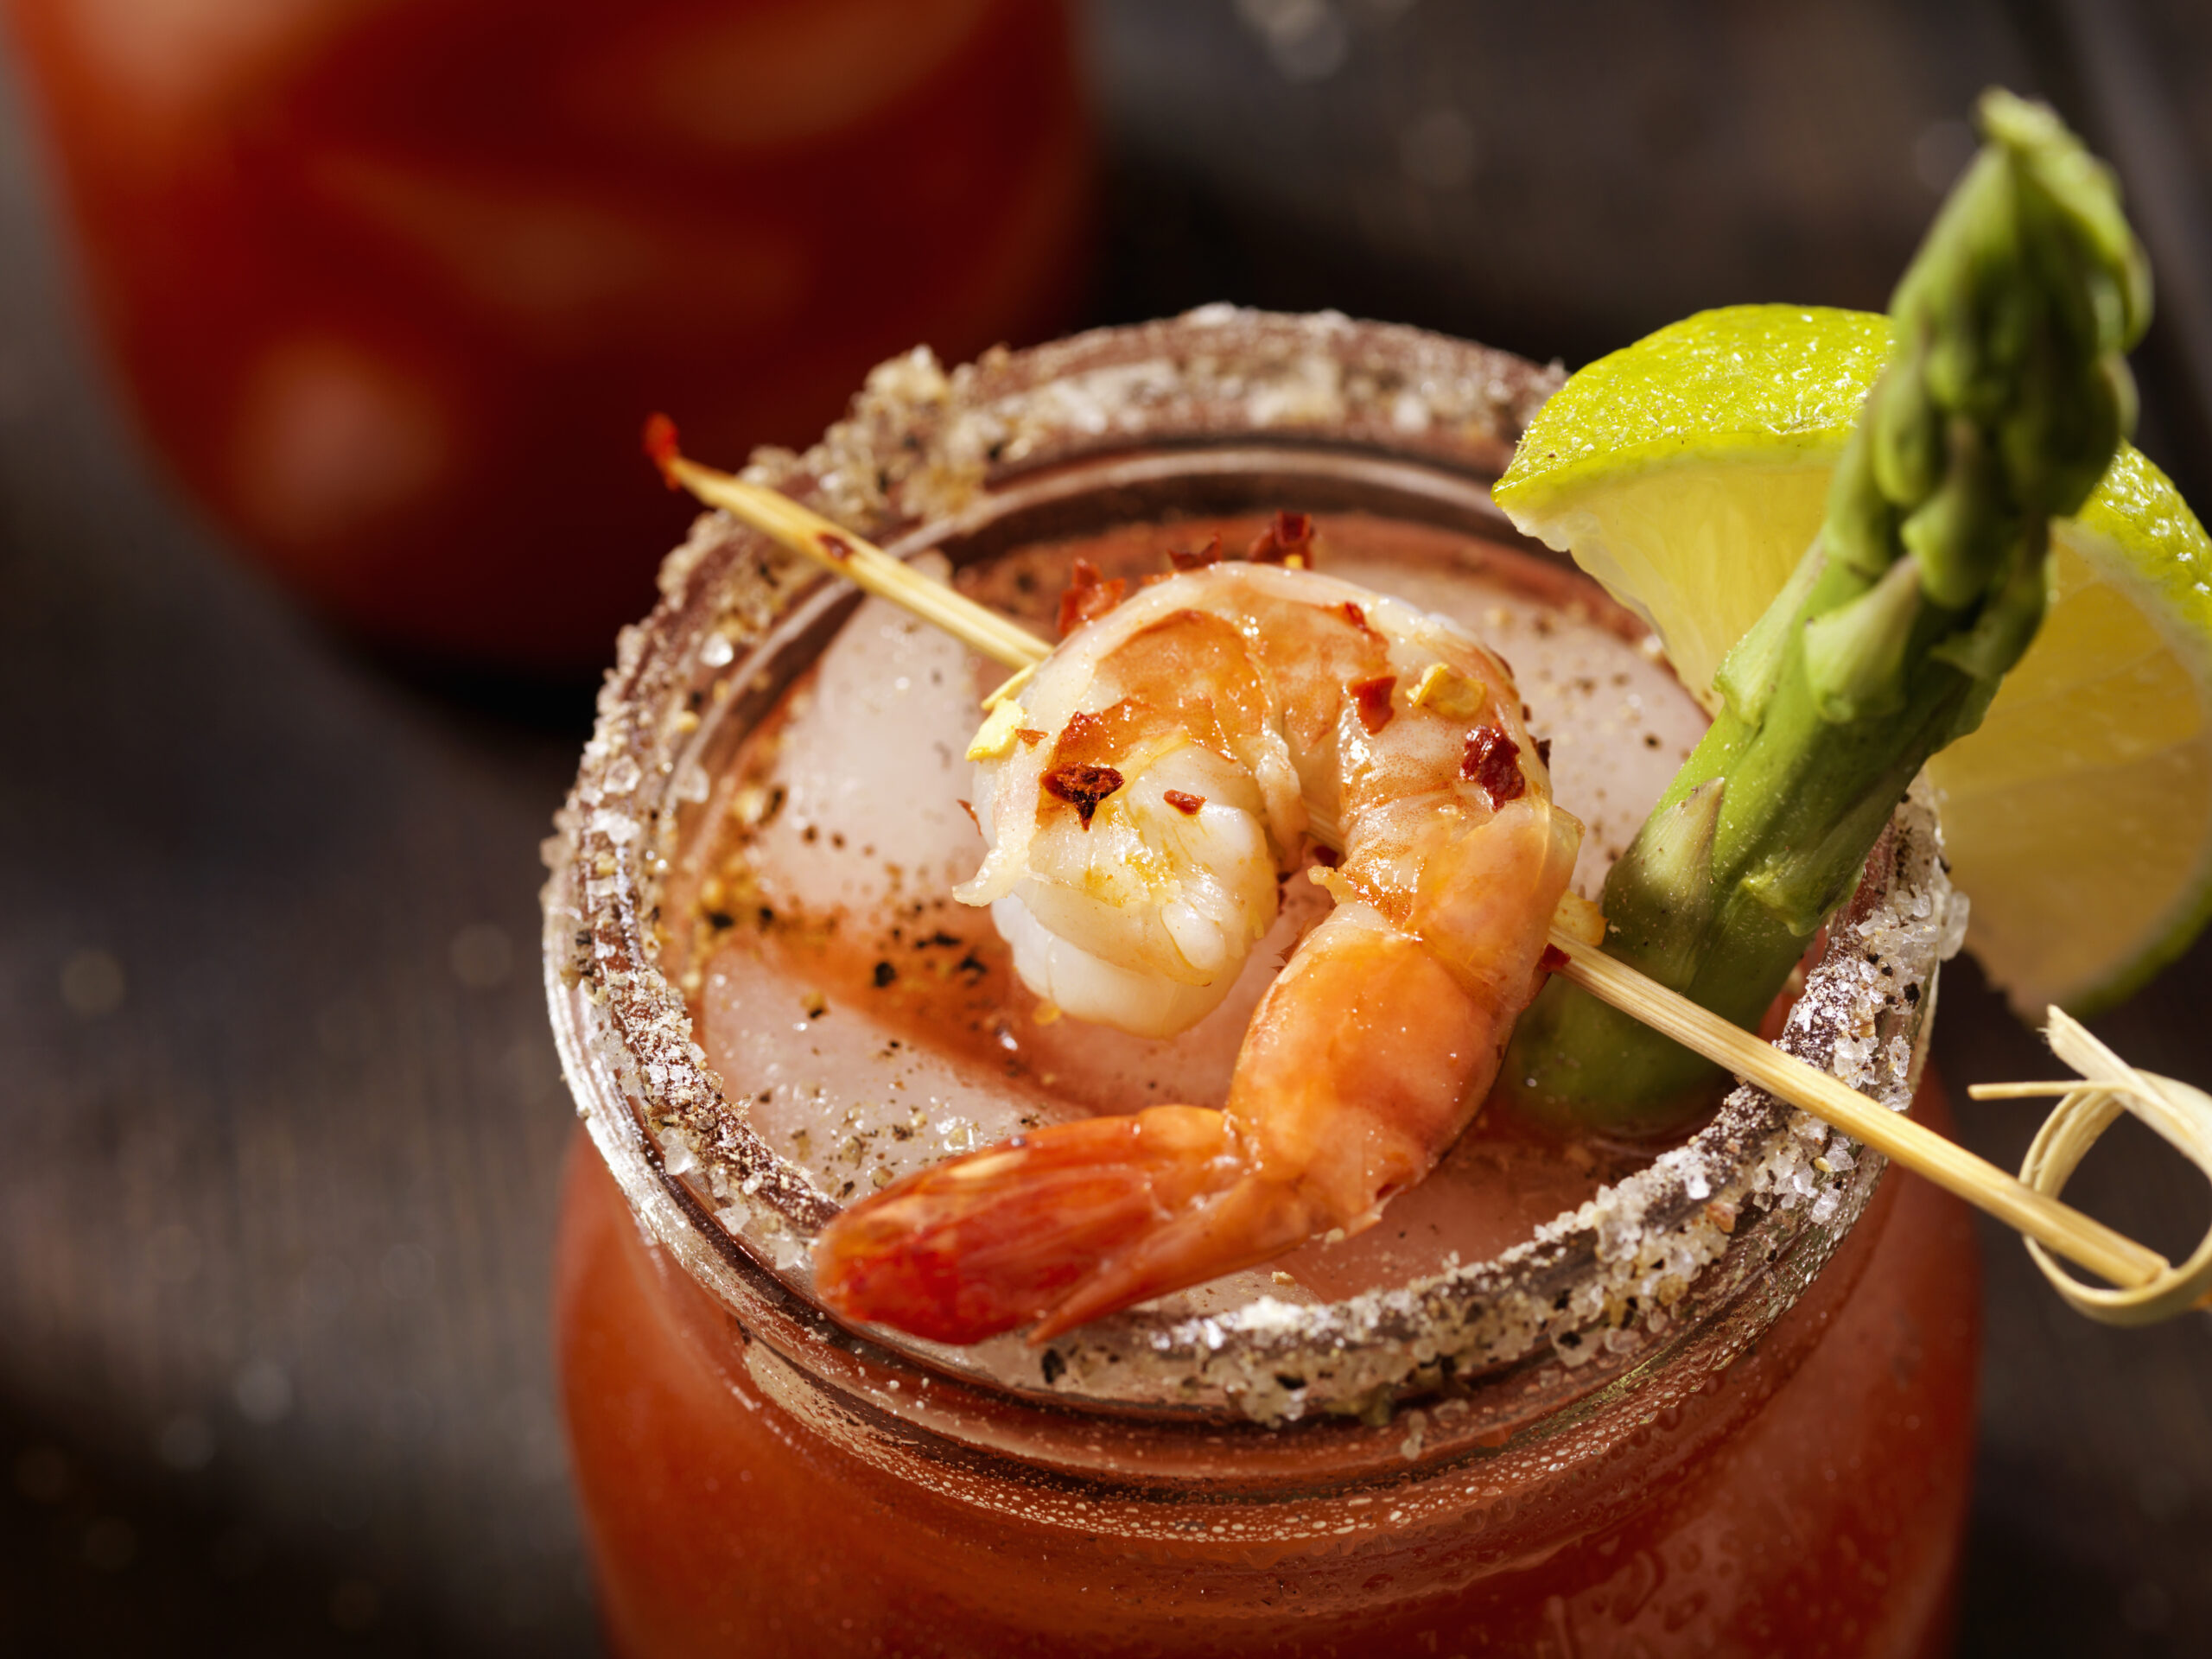 Bloody Mary or Caesar Cocktail on the Rocks with Lime, Celery and a Spiced Rim-Photographed on Hasselblad H3D2-39mb Camera